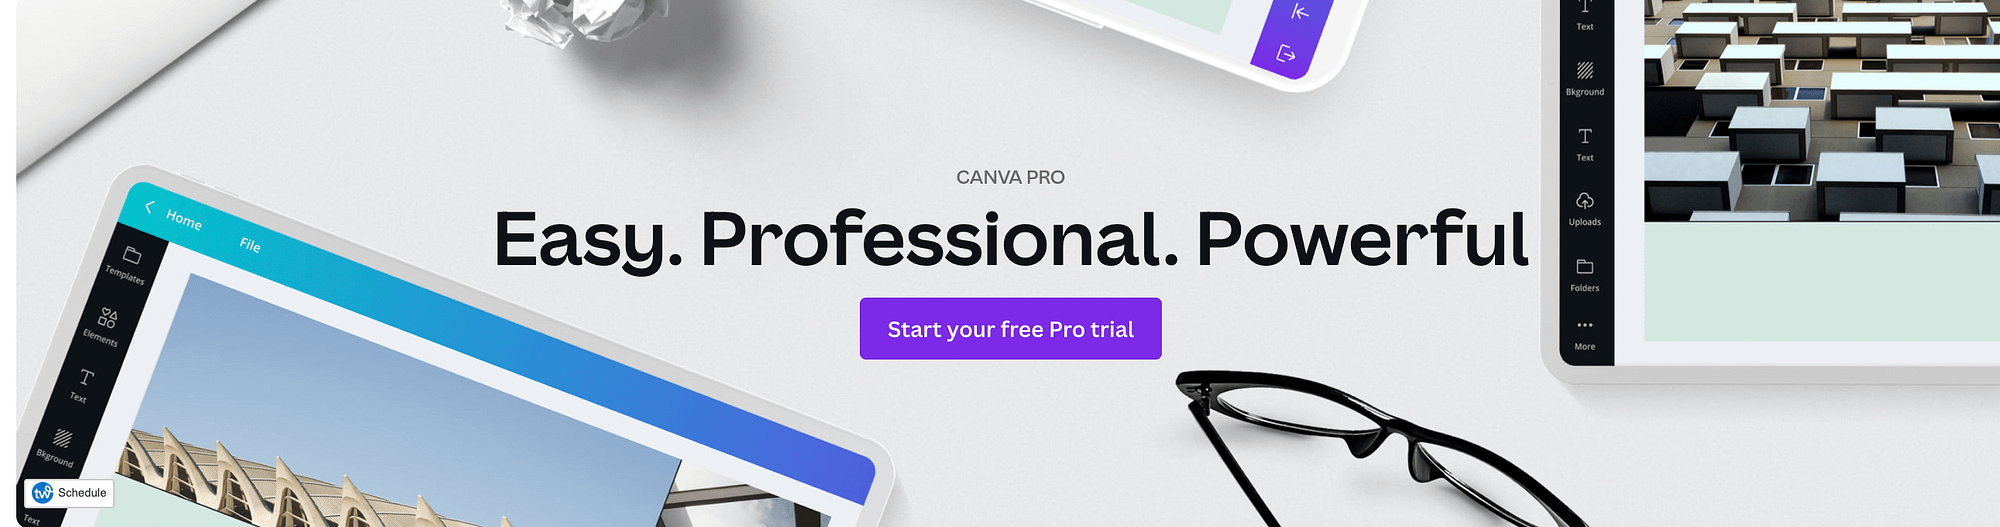 What will you design today? With Canva, it's easy to engage your audience, build your brand, and create amazing visual content together — no design experience needed.